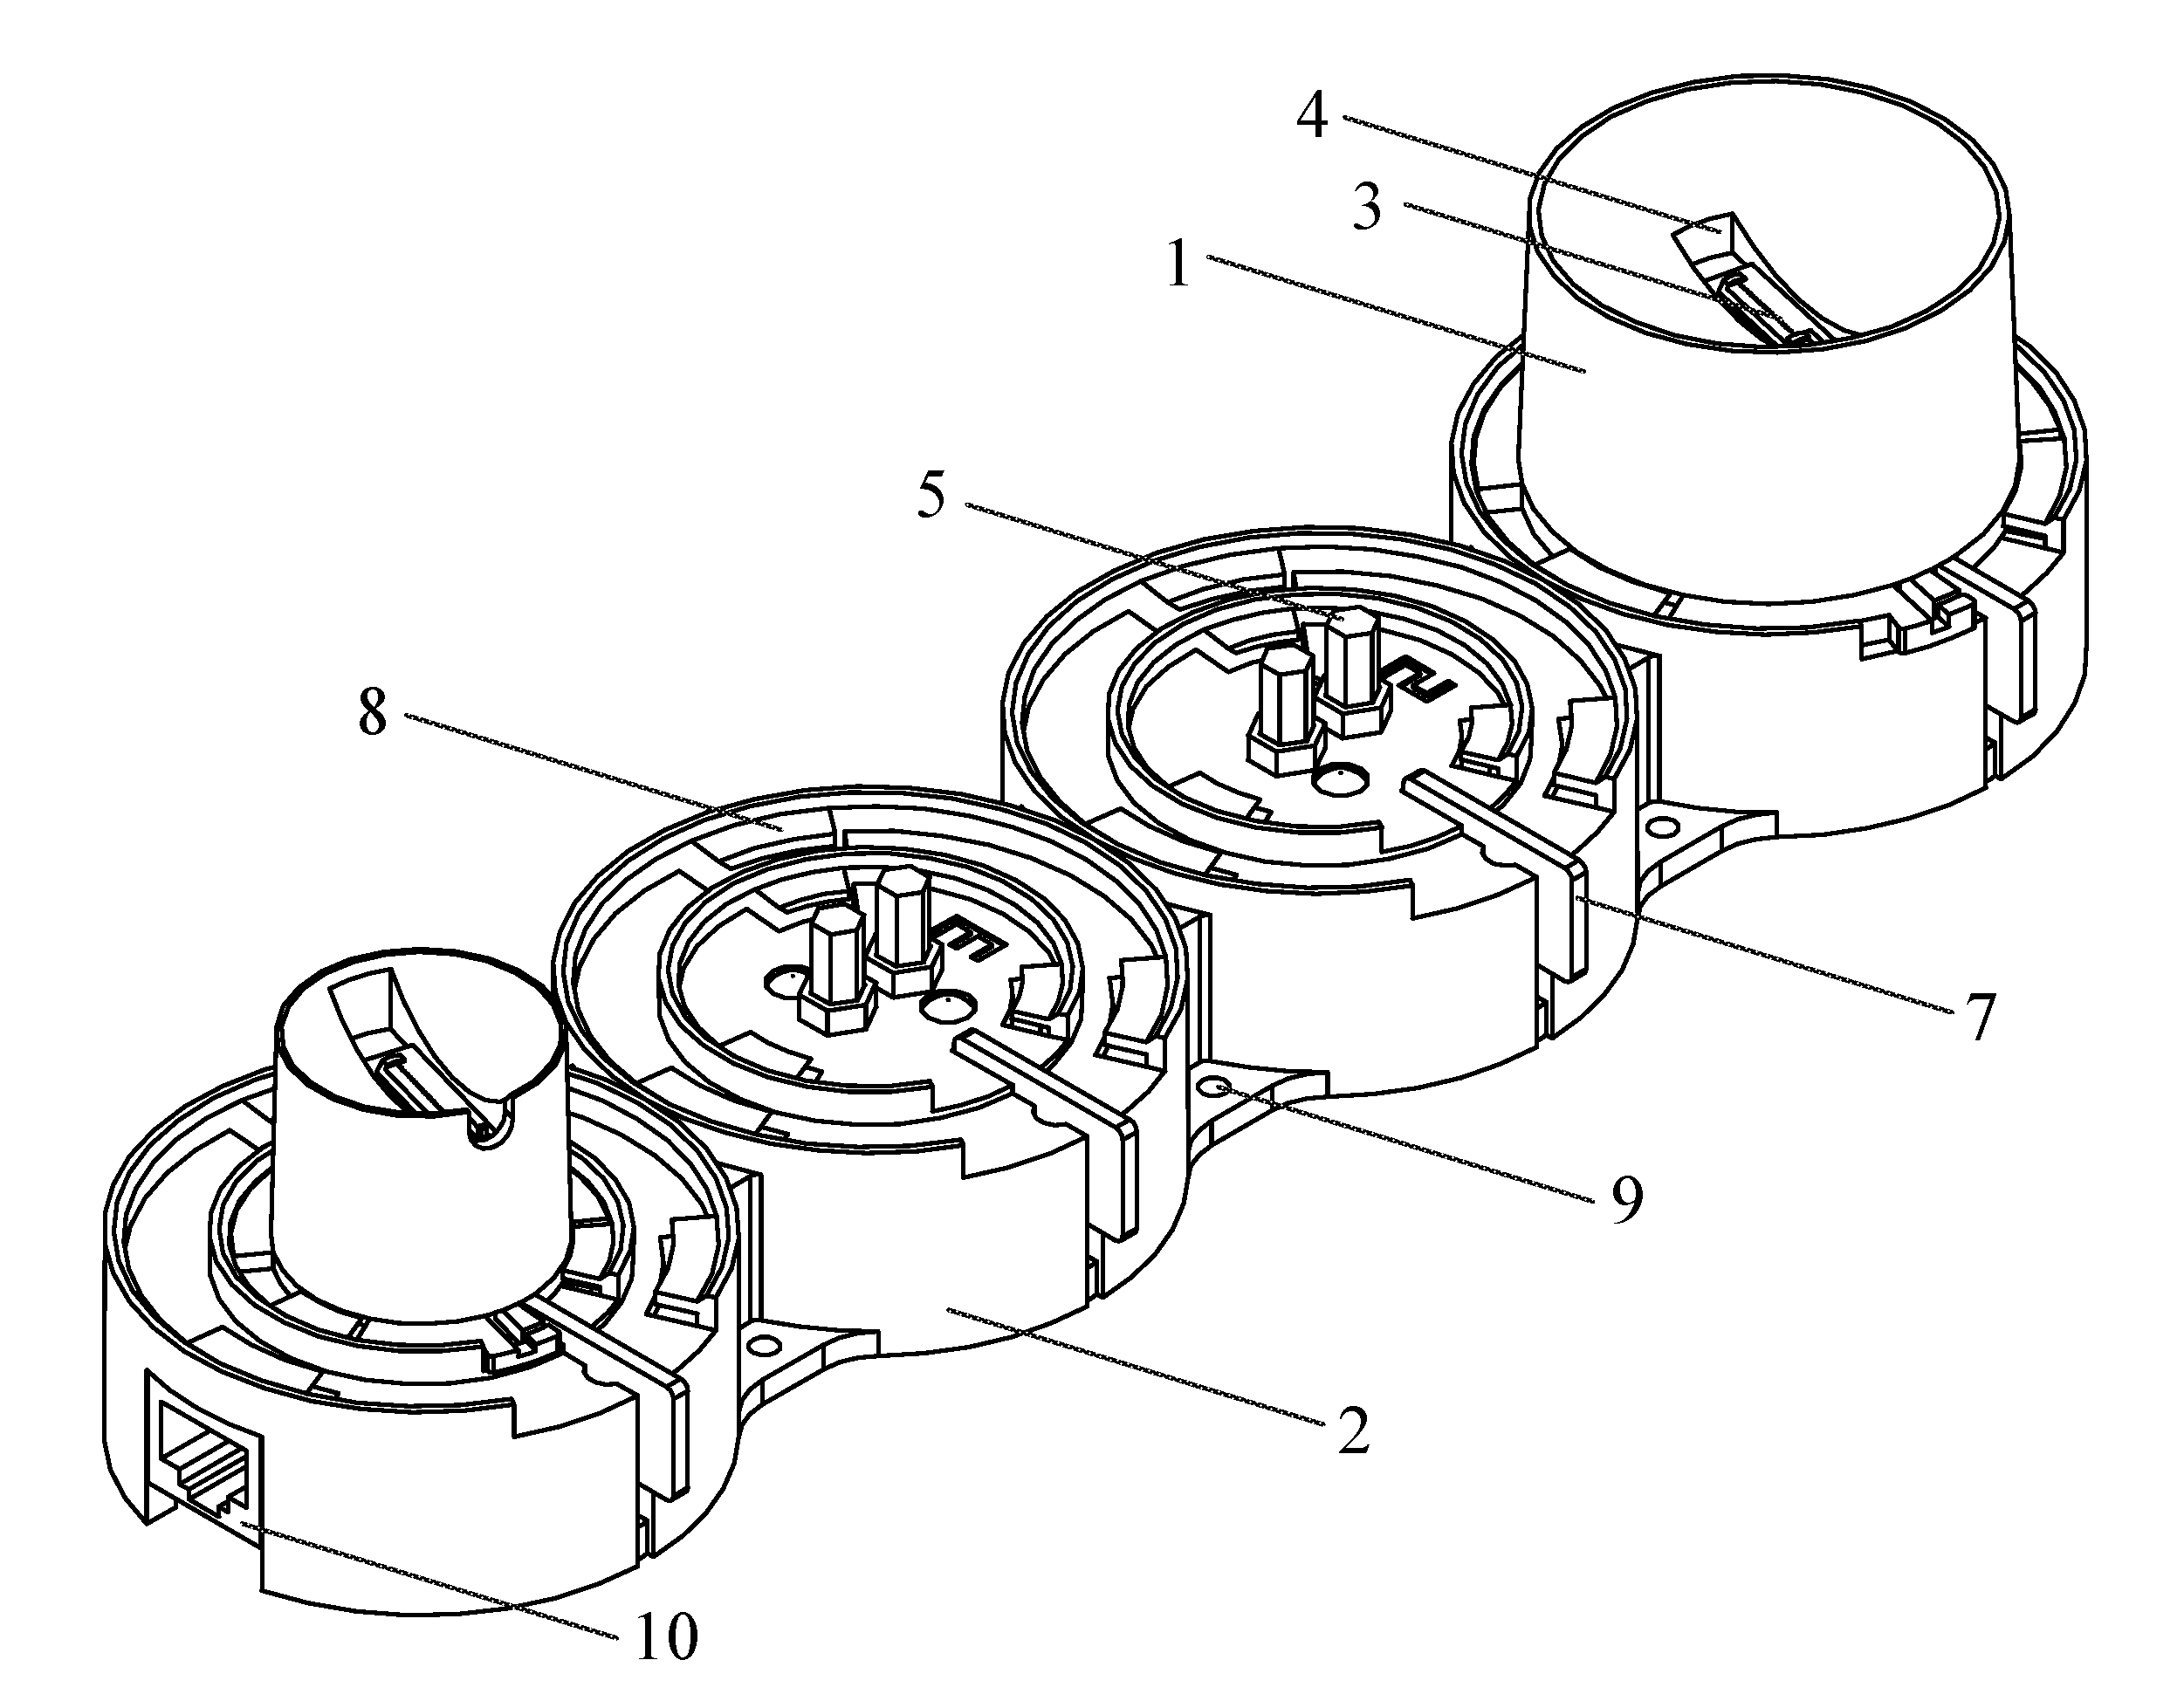 Device for launching fireworks